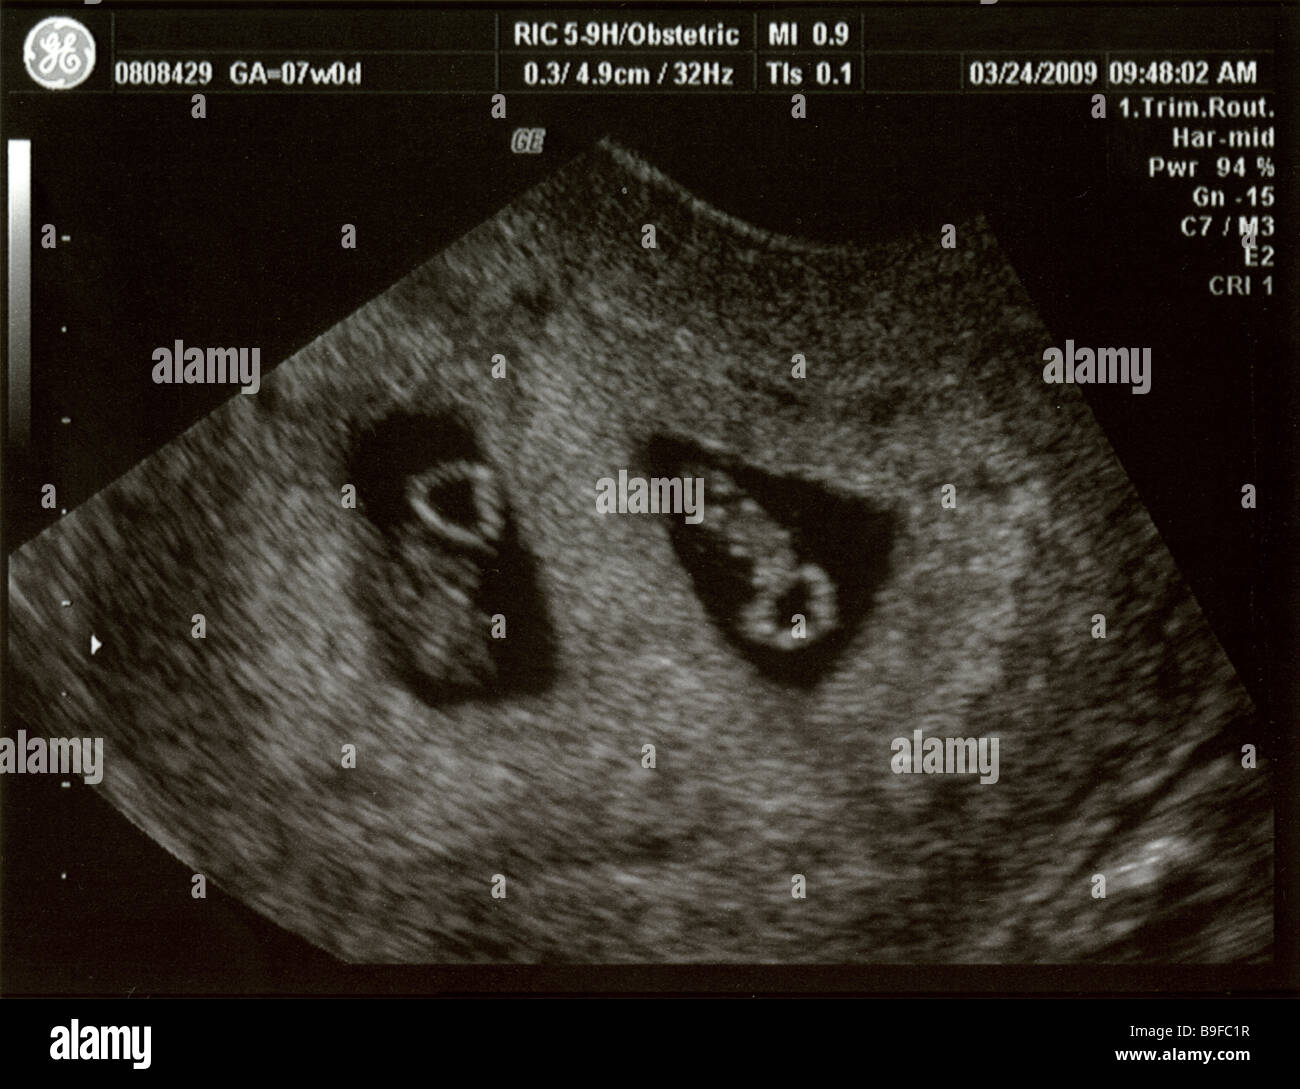 Ultrasound Pictures Of Twins Only 3